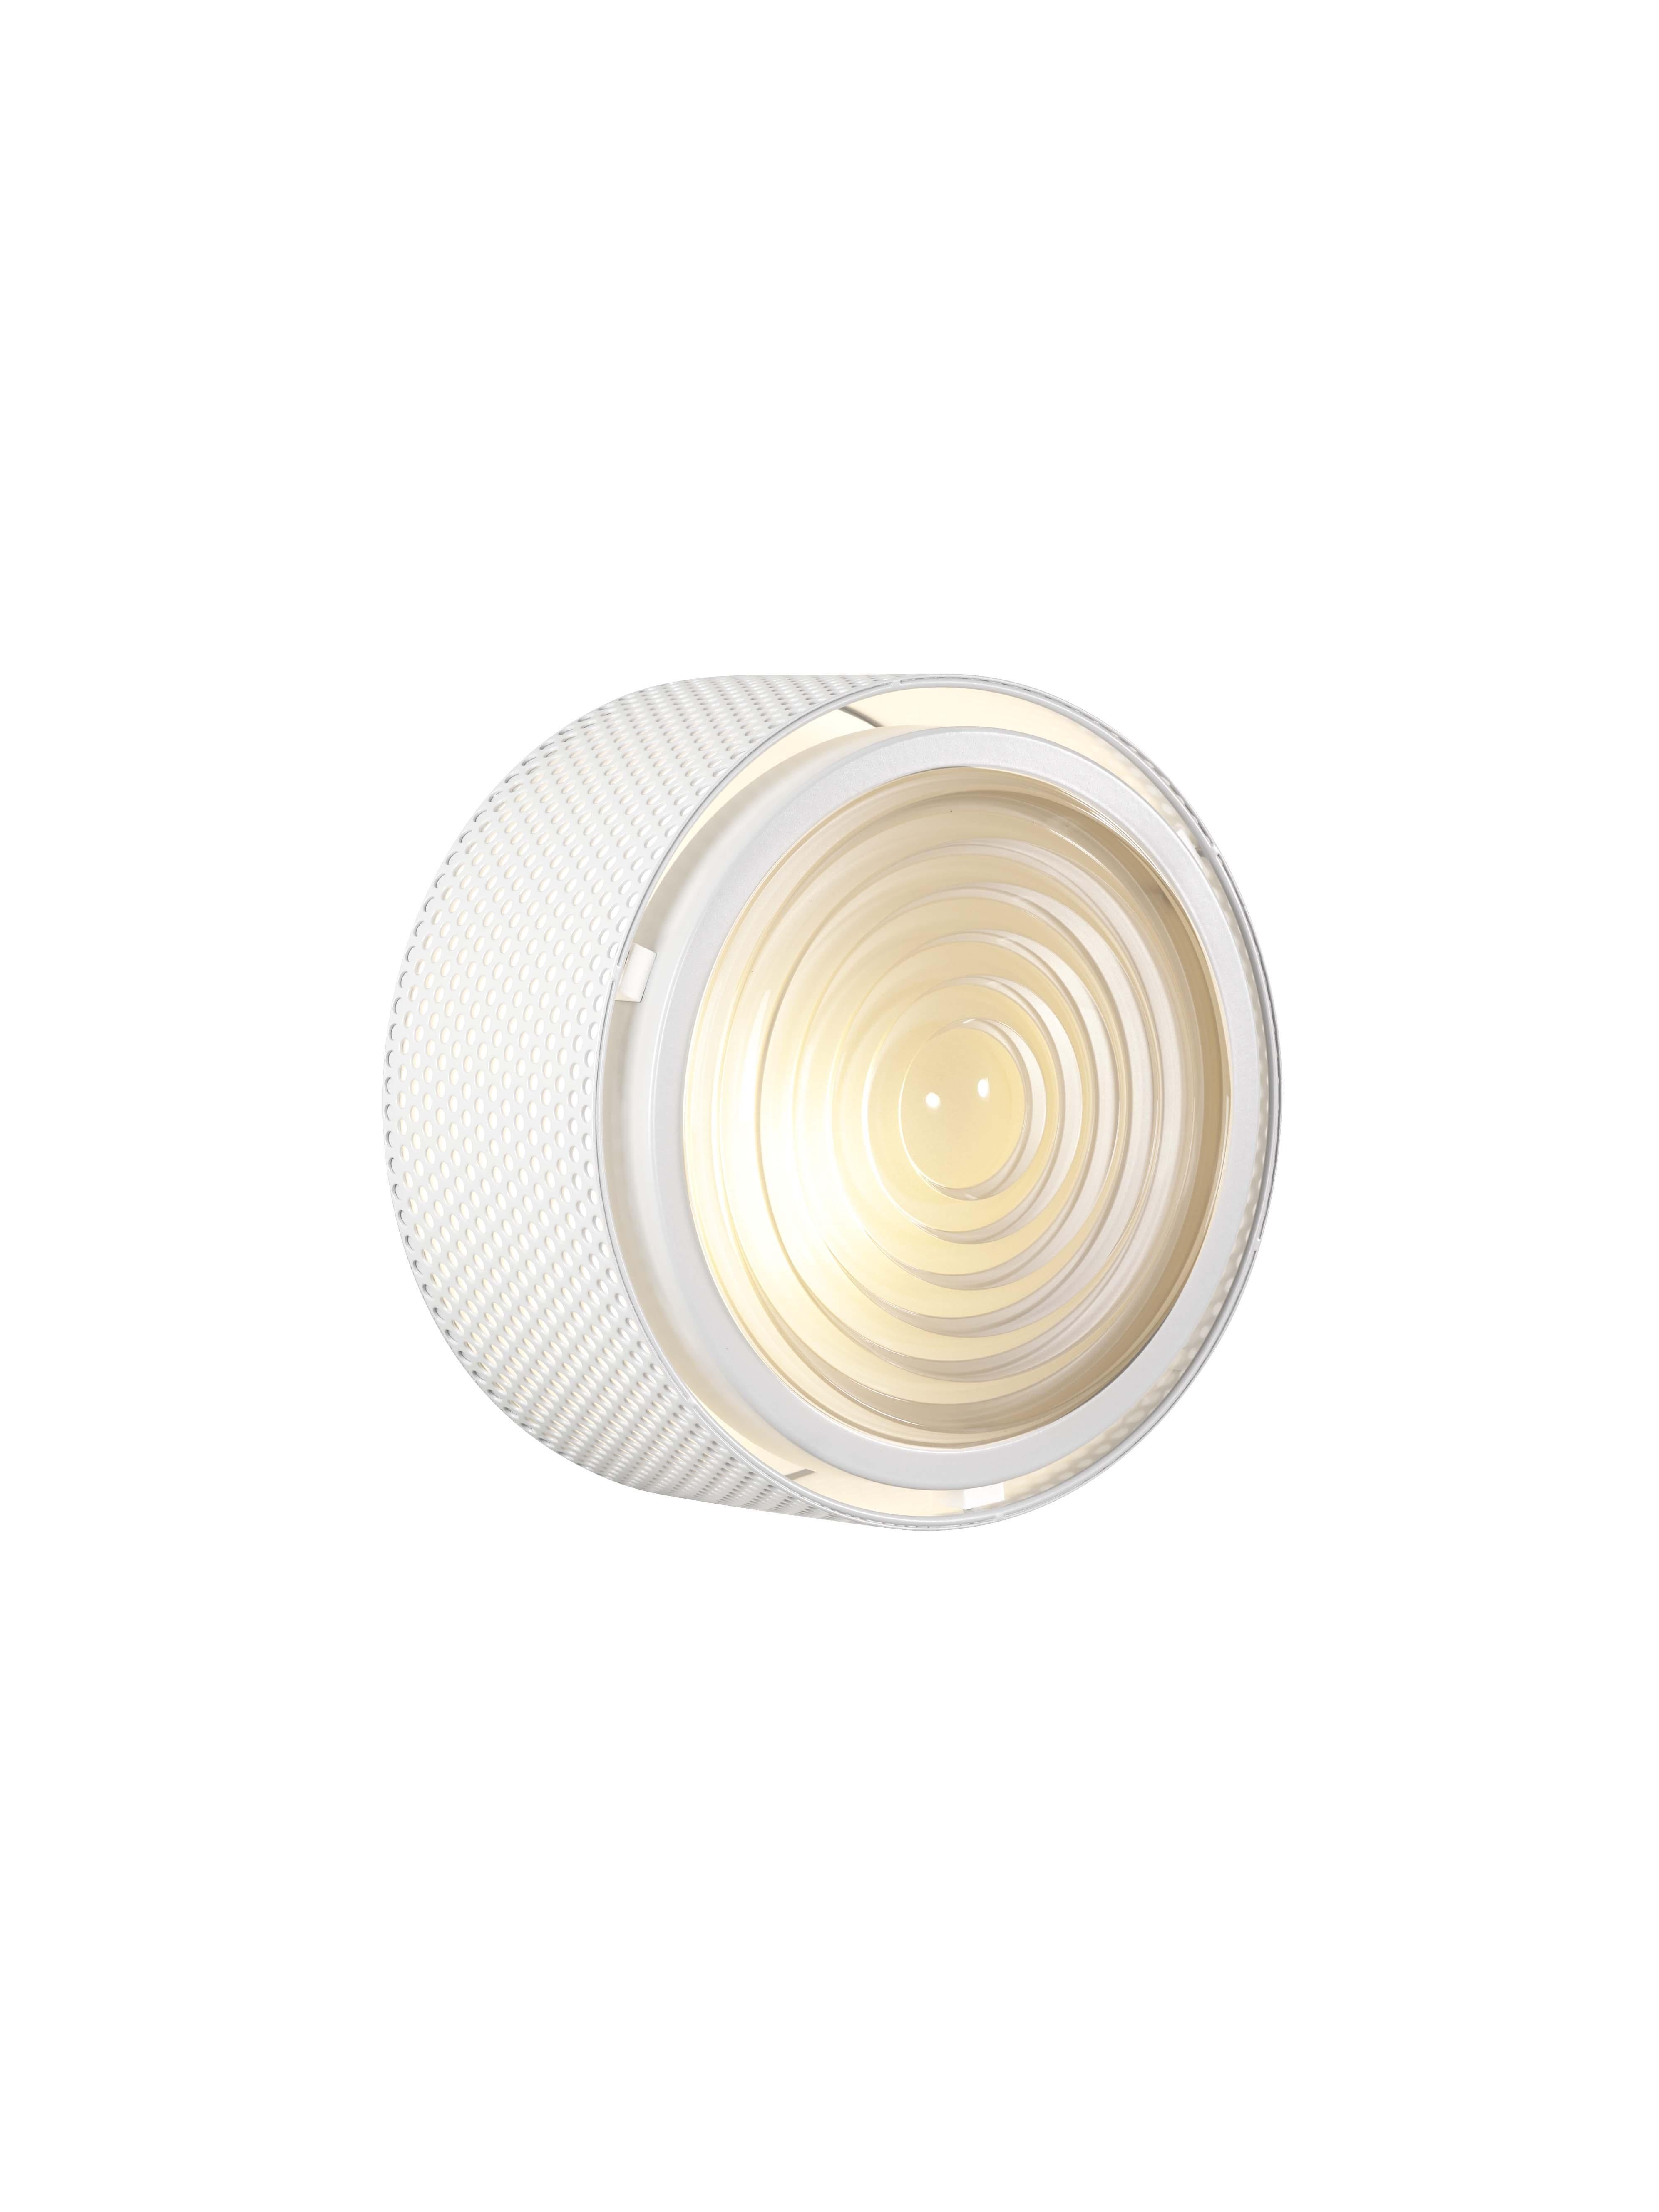 Pierre Guariche 'G13' Wall or Ceiling Light for Sammode Studio in White For Sale 1